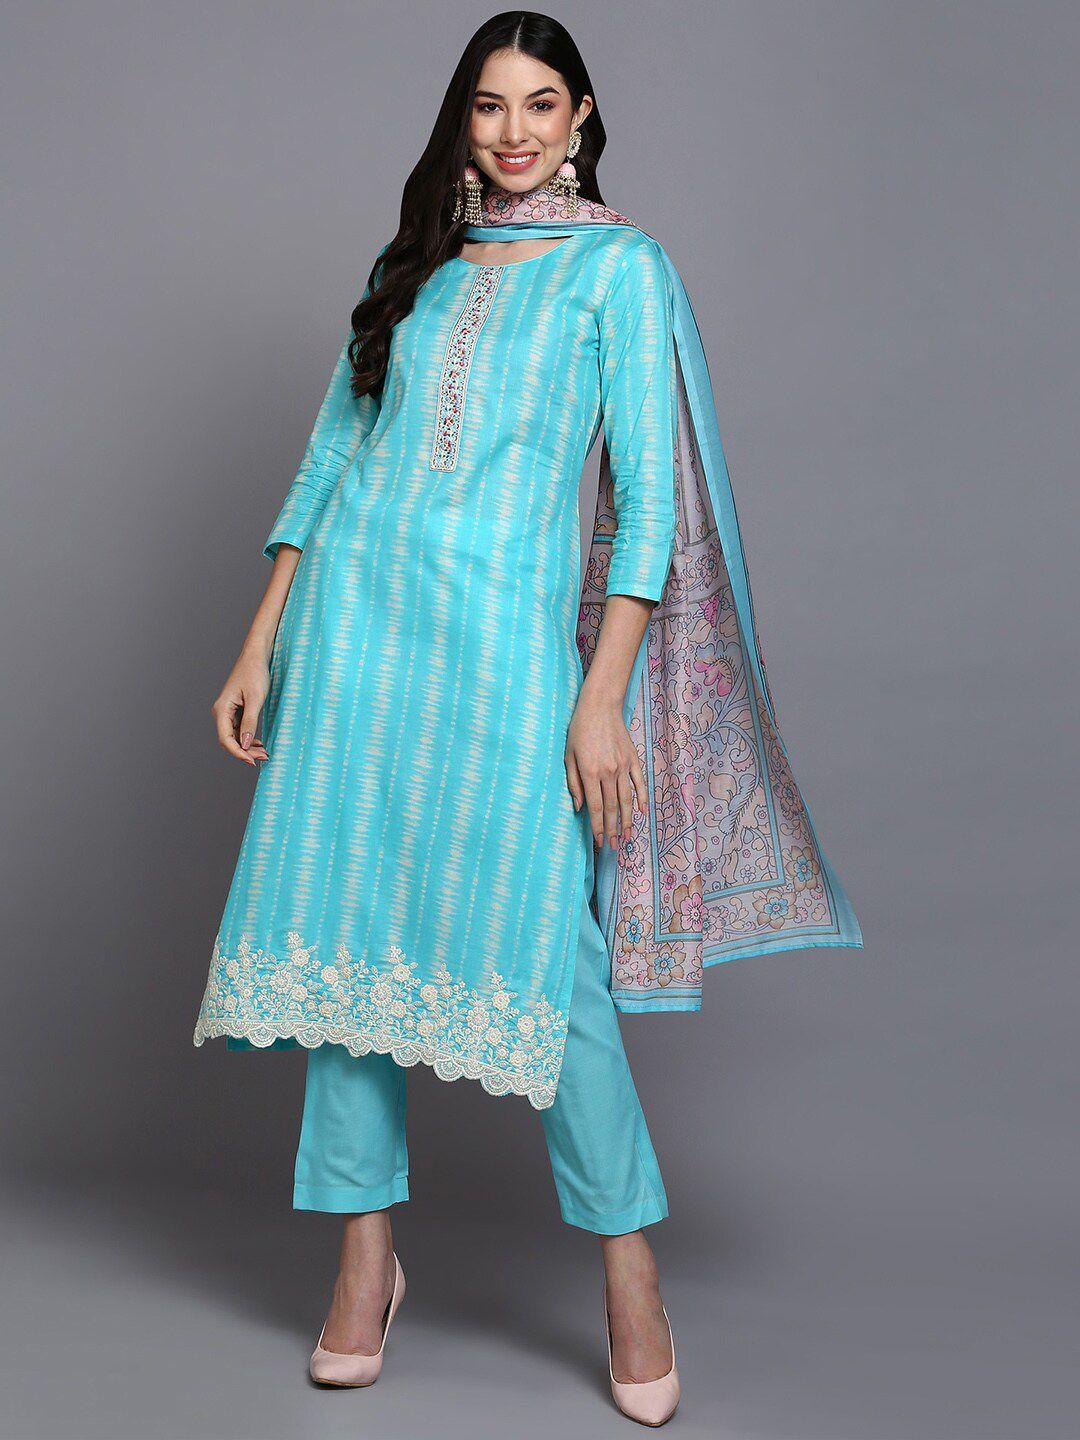 ahika turquoise blue& white  abstract printed pure cotton kurta & trousers with dupatta